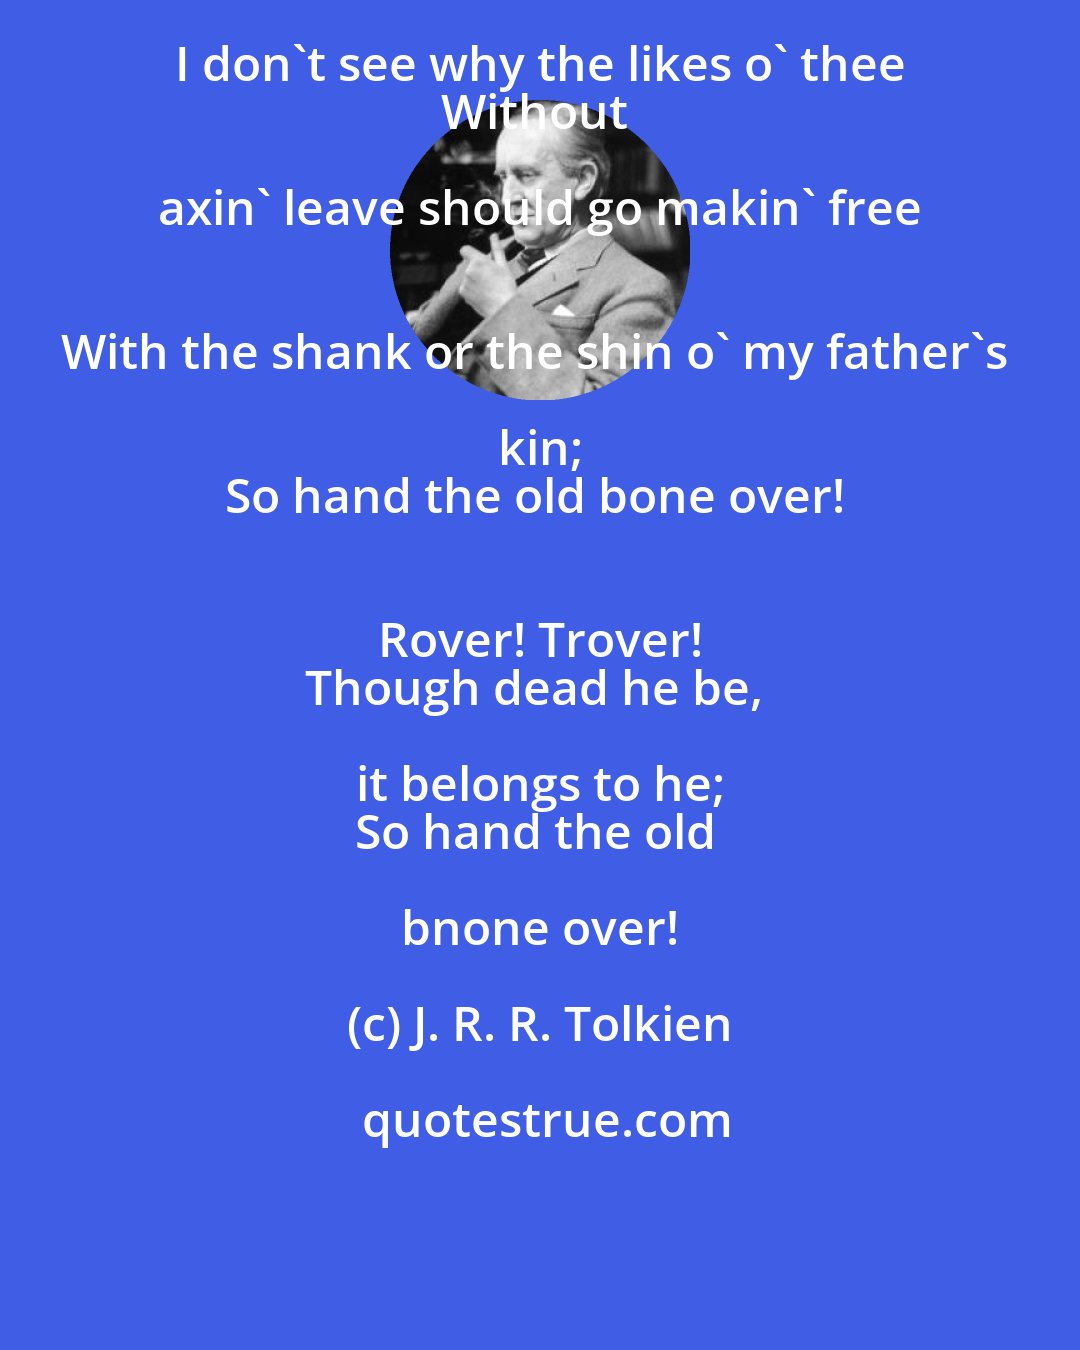 J. R. R. Tolkien: I don't see why the likes o' thee 
Without axin' leave should go makin' free 
With the shank or the shin o' my father's kin; 
So hand the old bone over! 
 Rover! Trover! 
Though dead he be, it belongs to he; 
So hand the old bnone over!